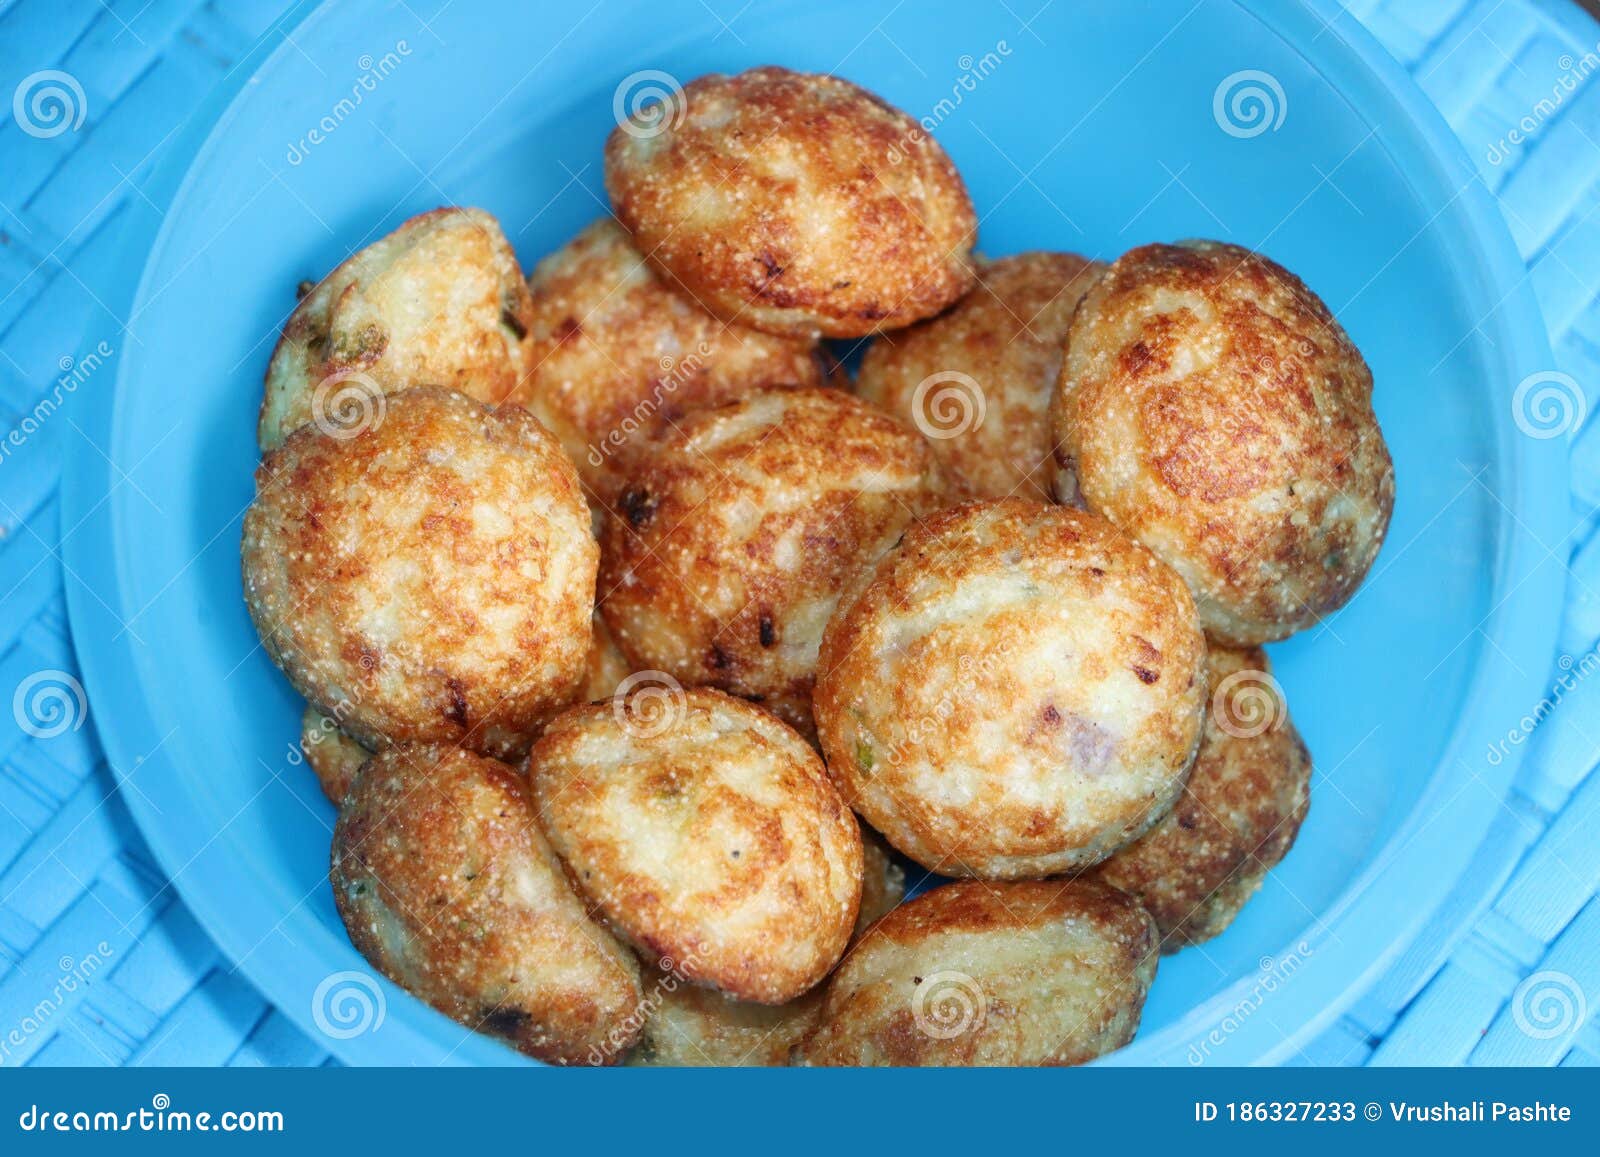 Appum or Appe, Authentic South Indian Breakfast Stock Image - Image of ...